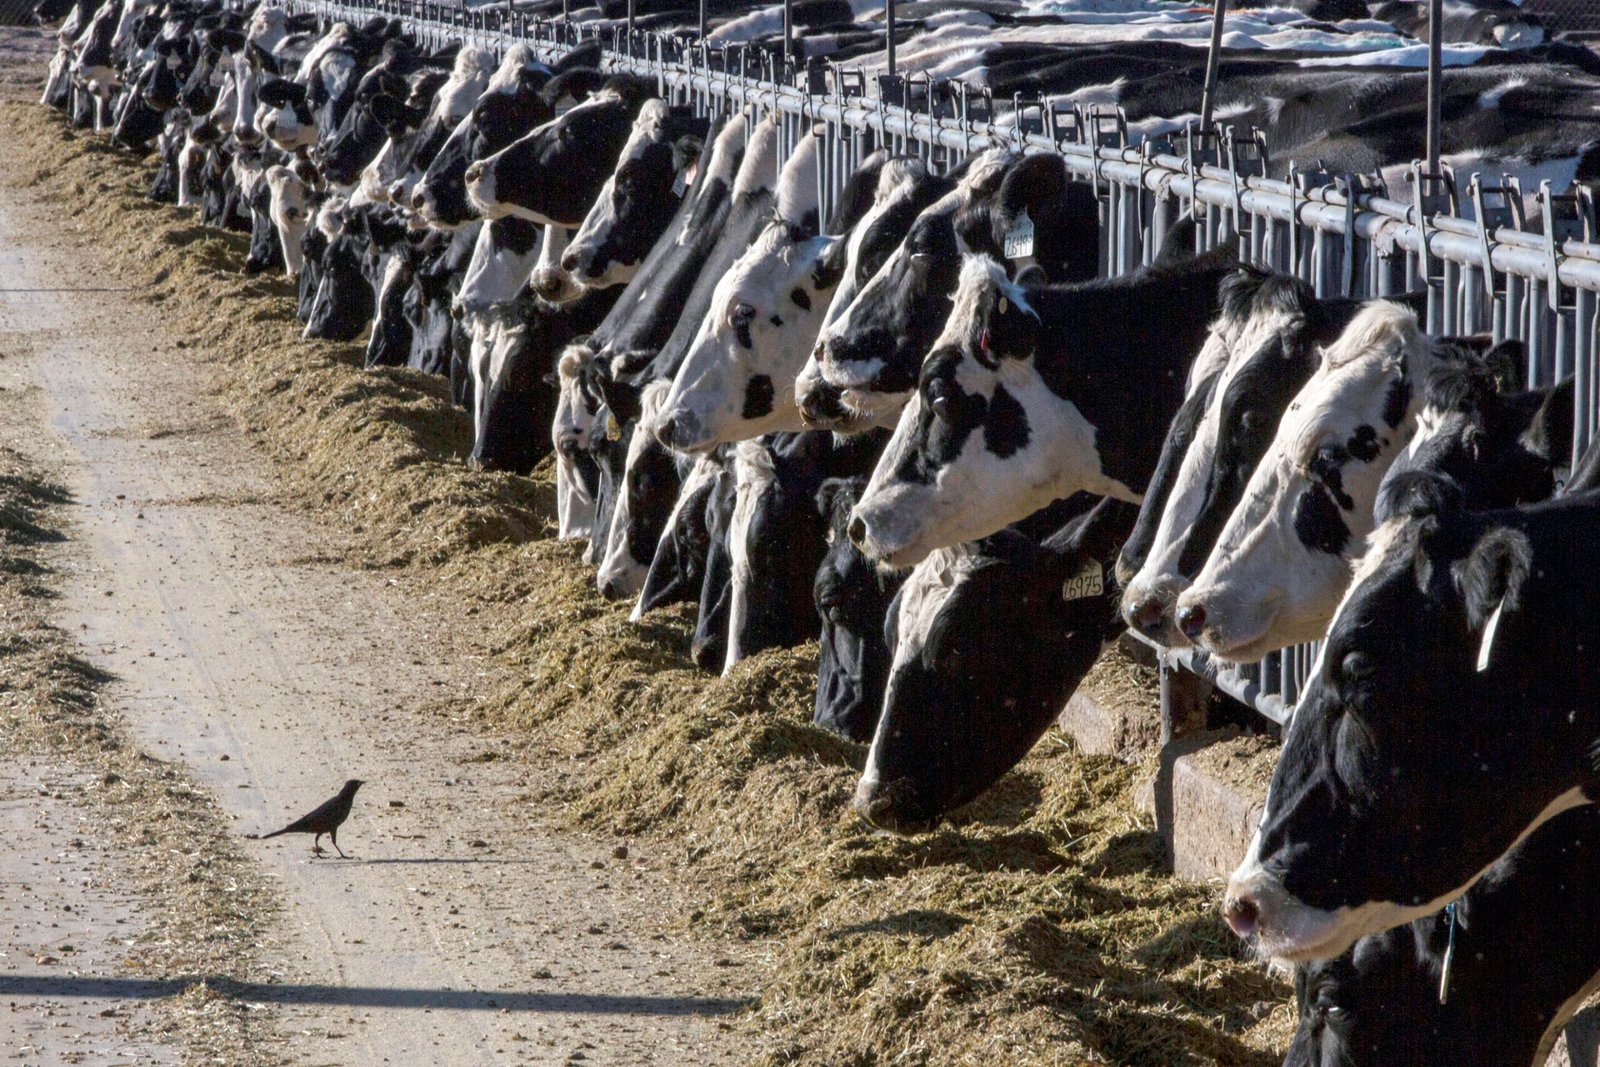 Bird flu virus detected in beef from an ill dairy cow but USDA says meat remains safe